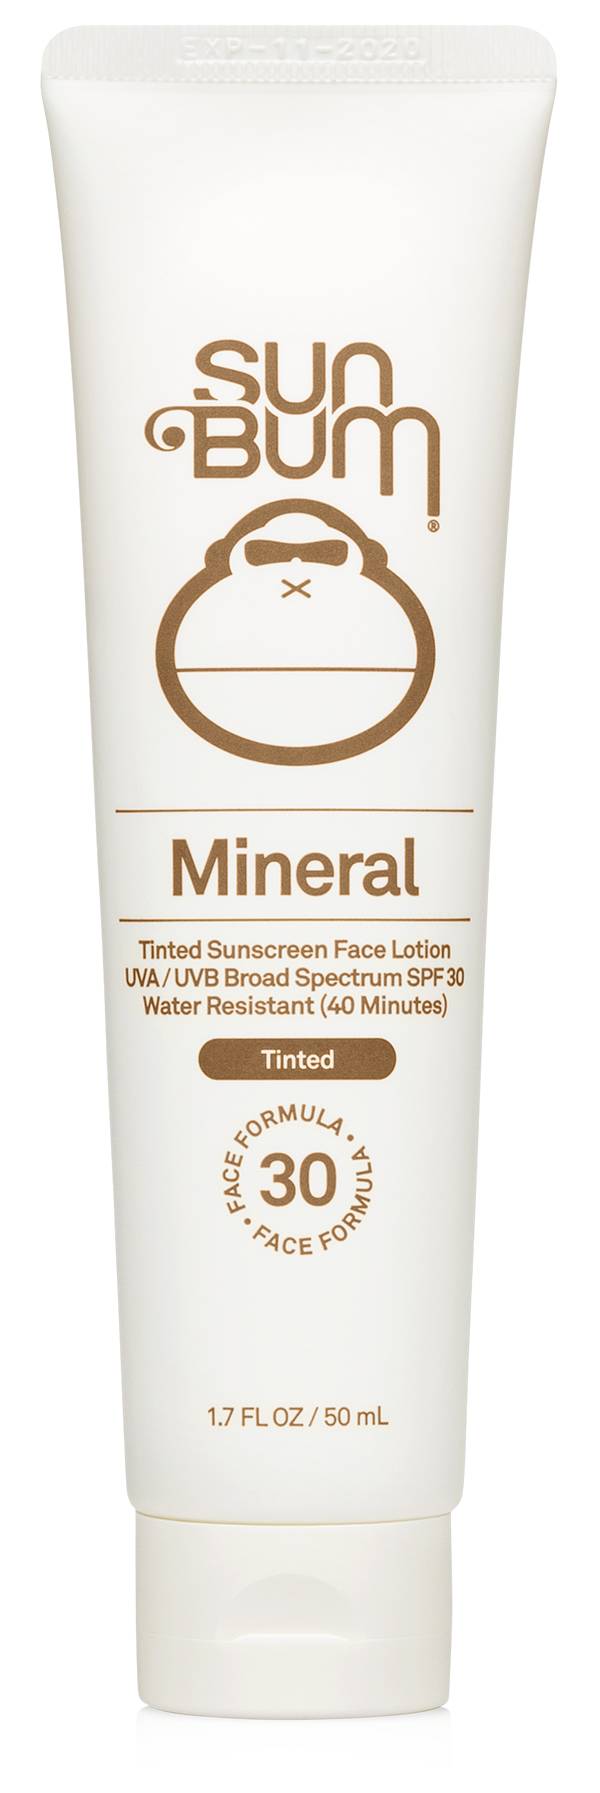 Sun Bum Mineral SPF 30 Tinted Face Lotion product image